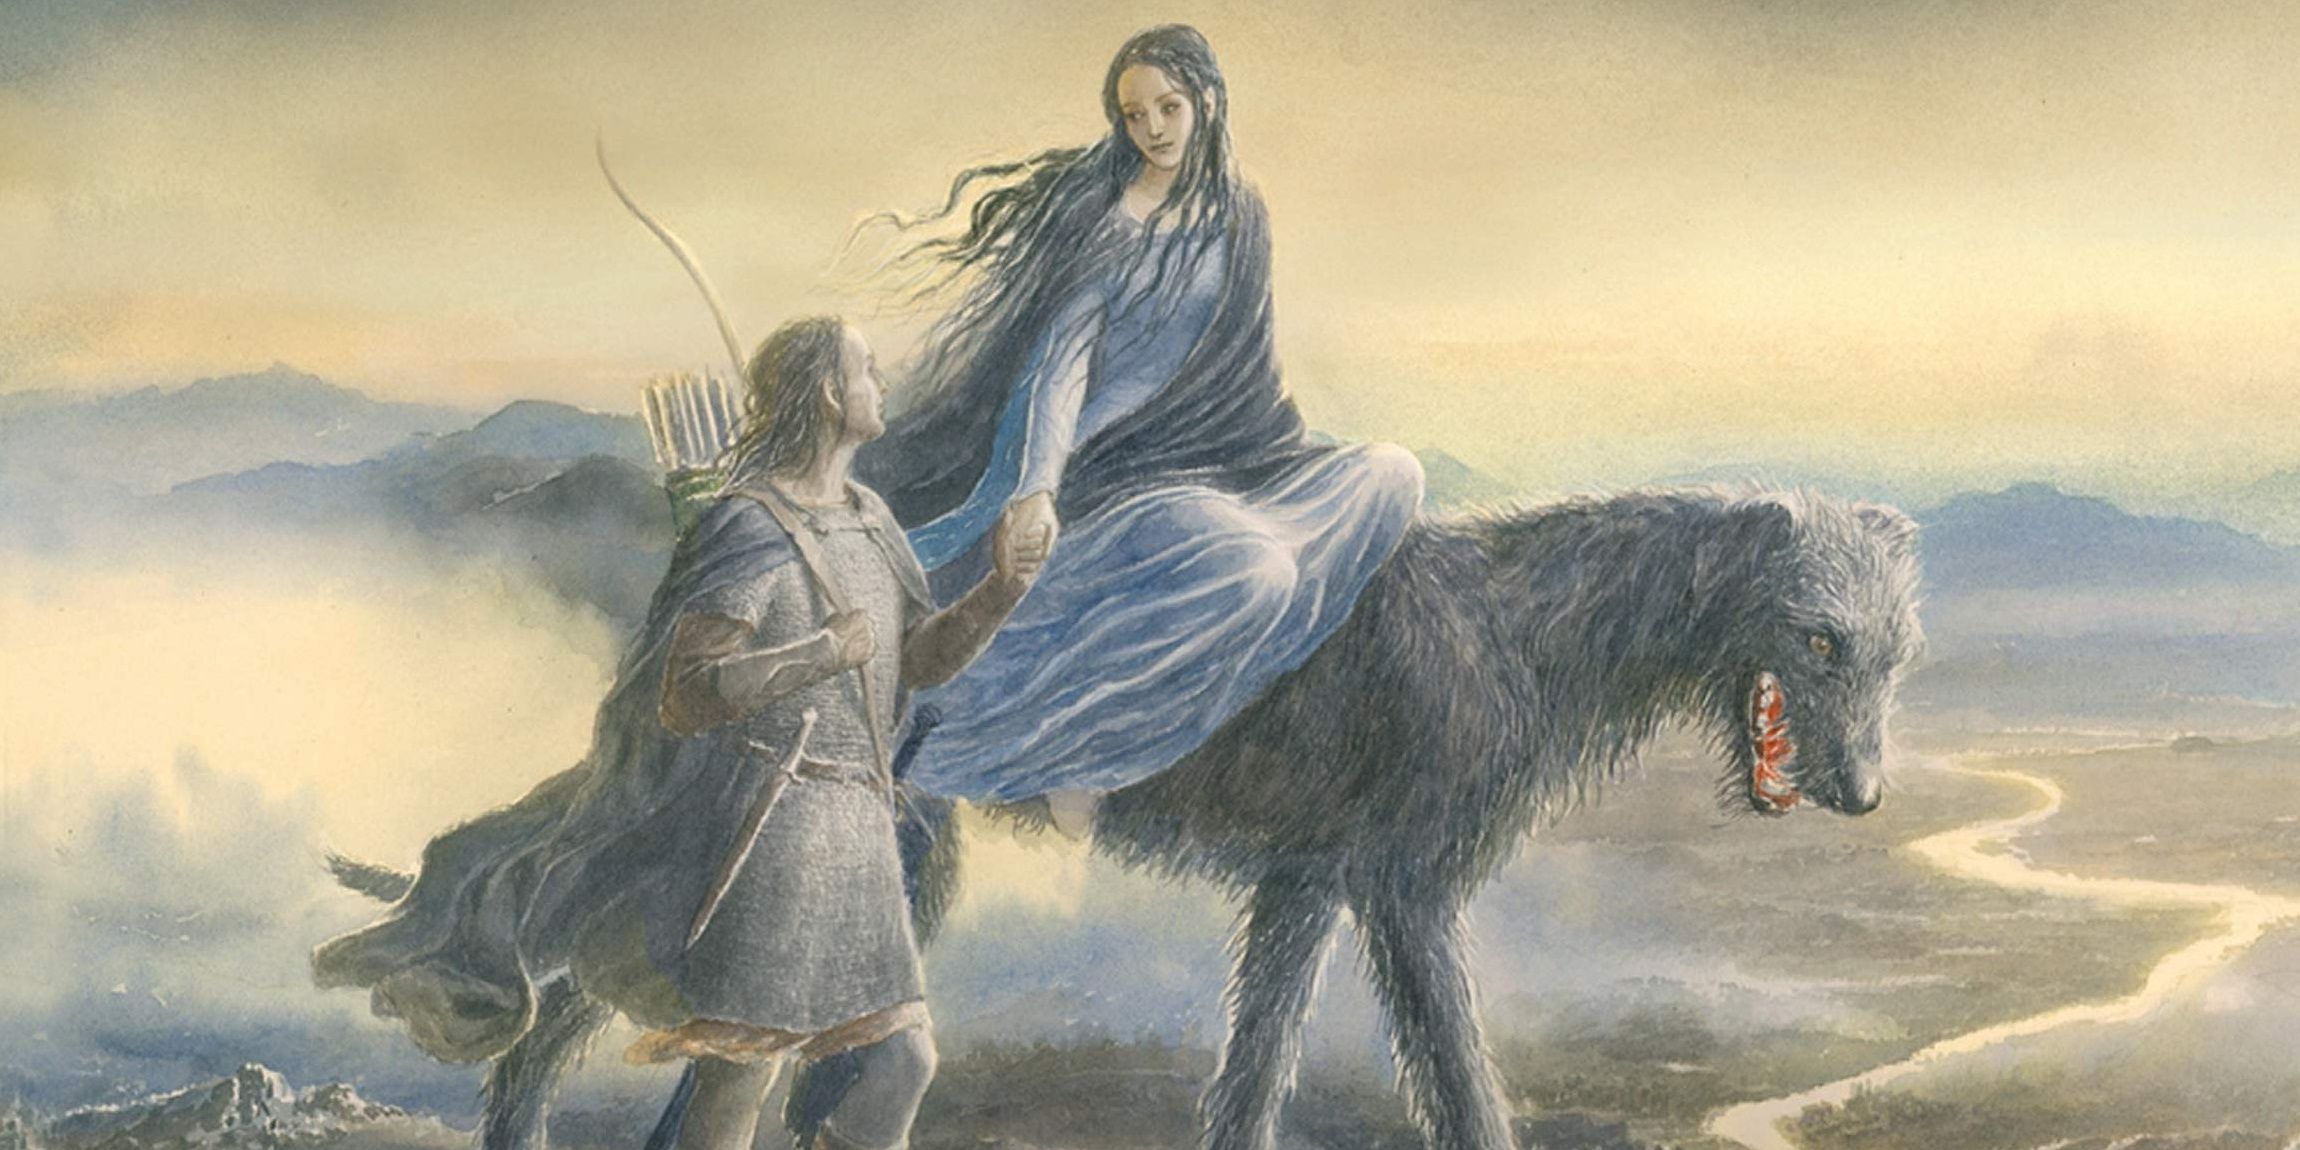 Beren, Huan, and Luthien in The Silmarillion